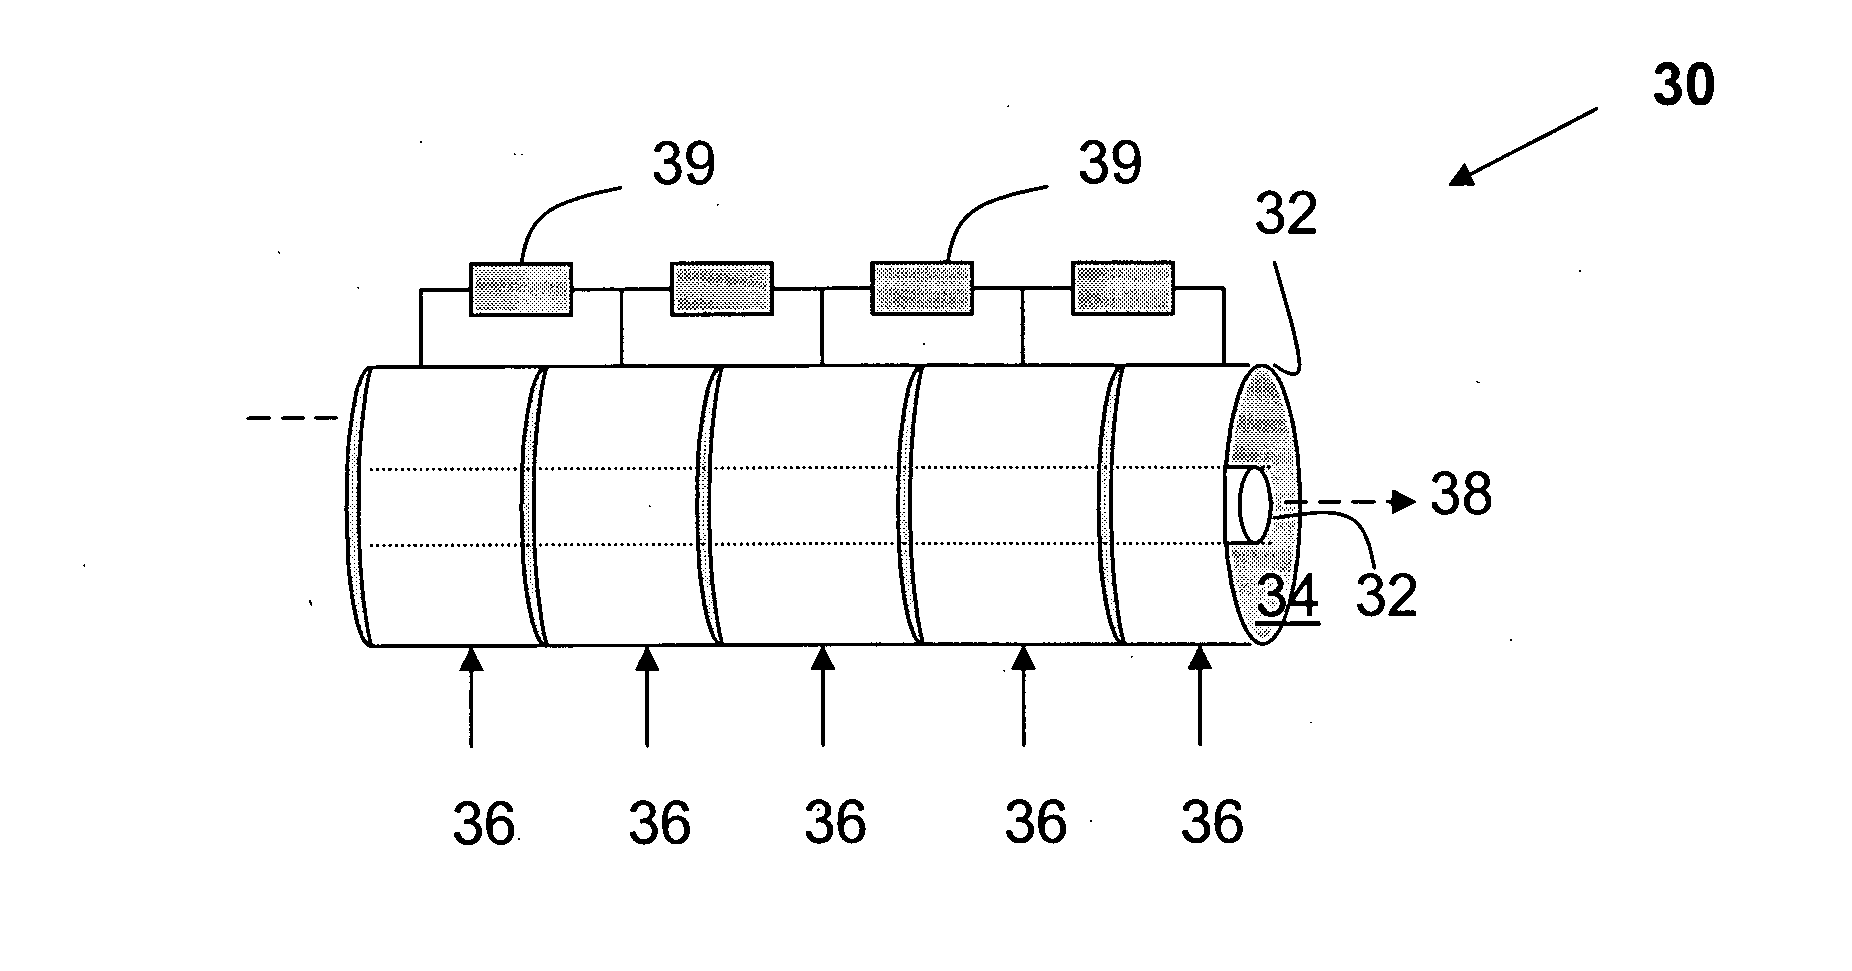 Method and apparatus for ion mobility spectrometry with alignment of dipole direction (IMS-ADD)